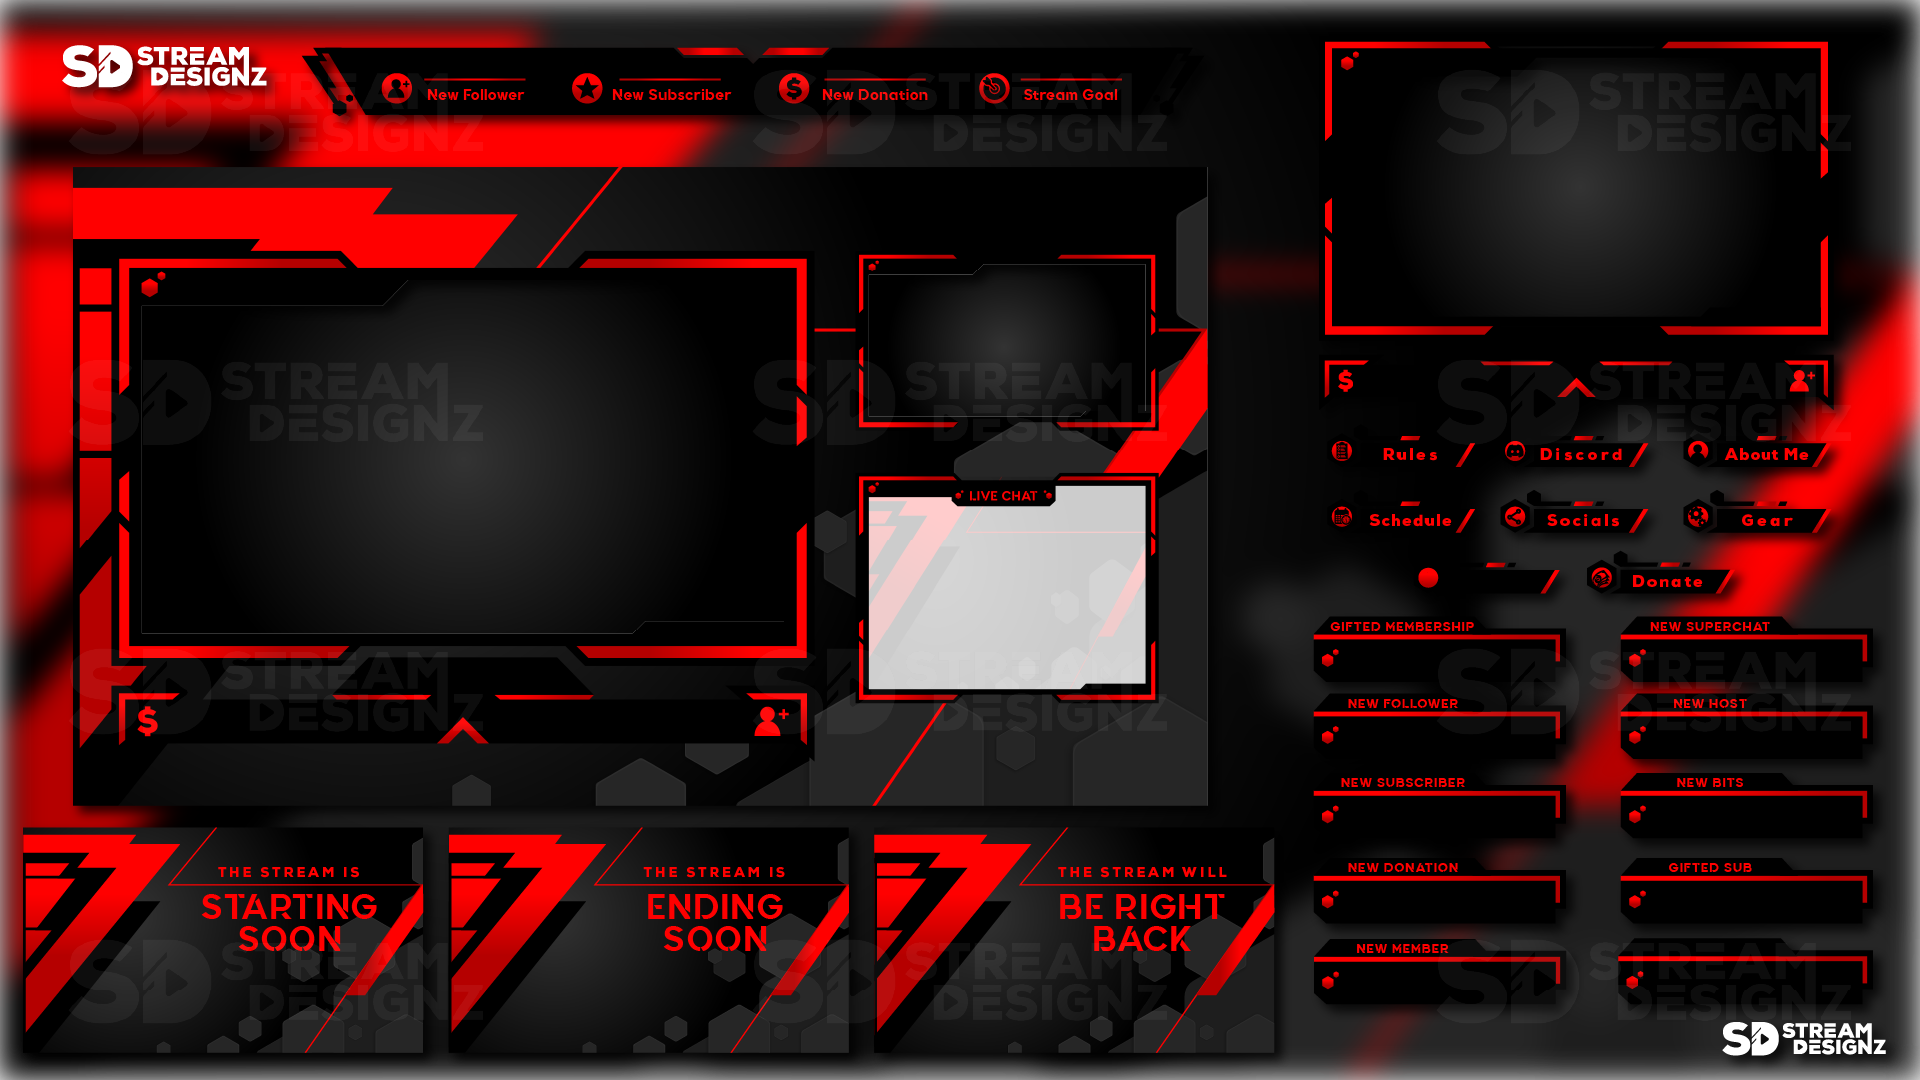 static stream overlay package - rogue feature image - stream designz